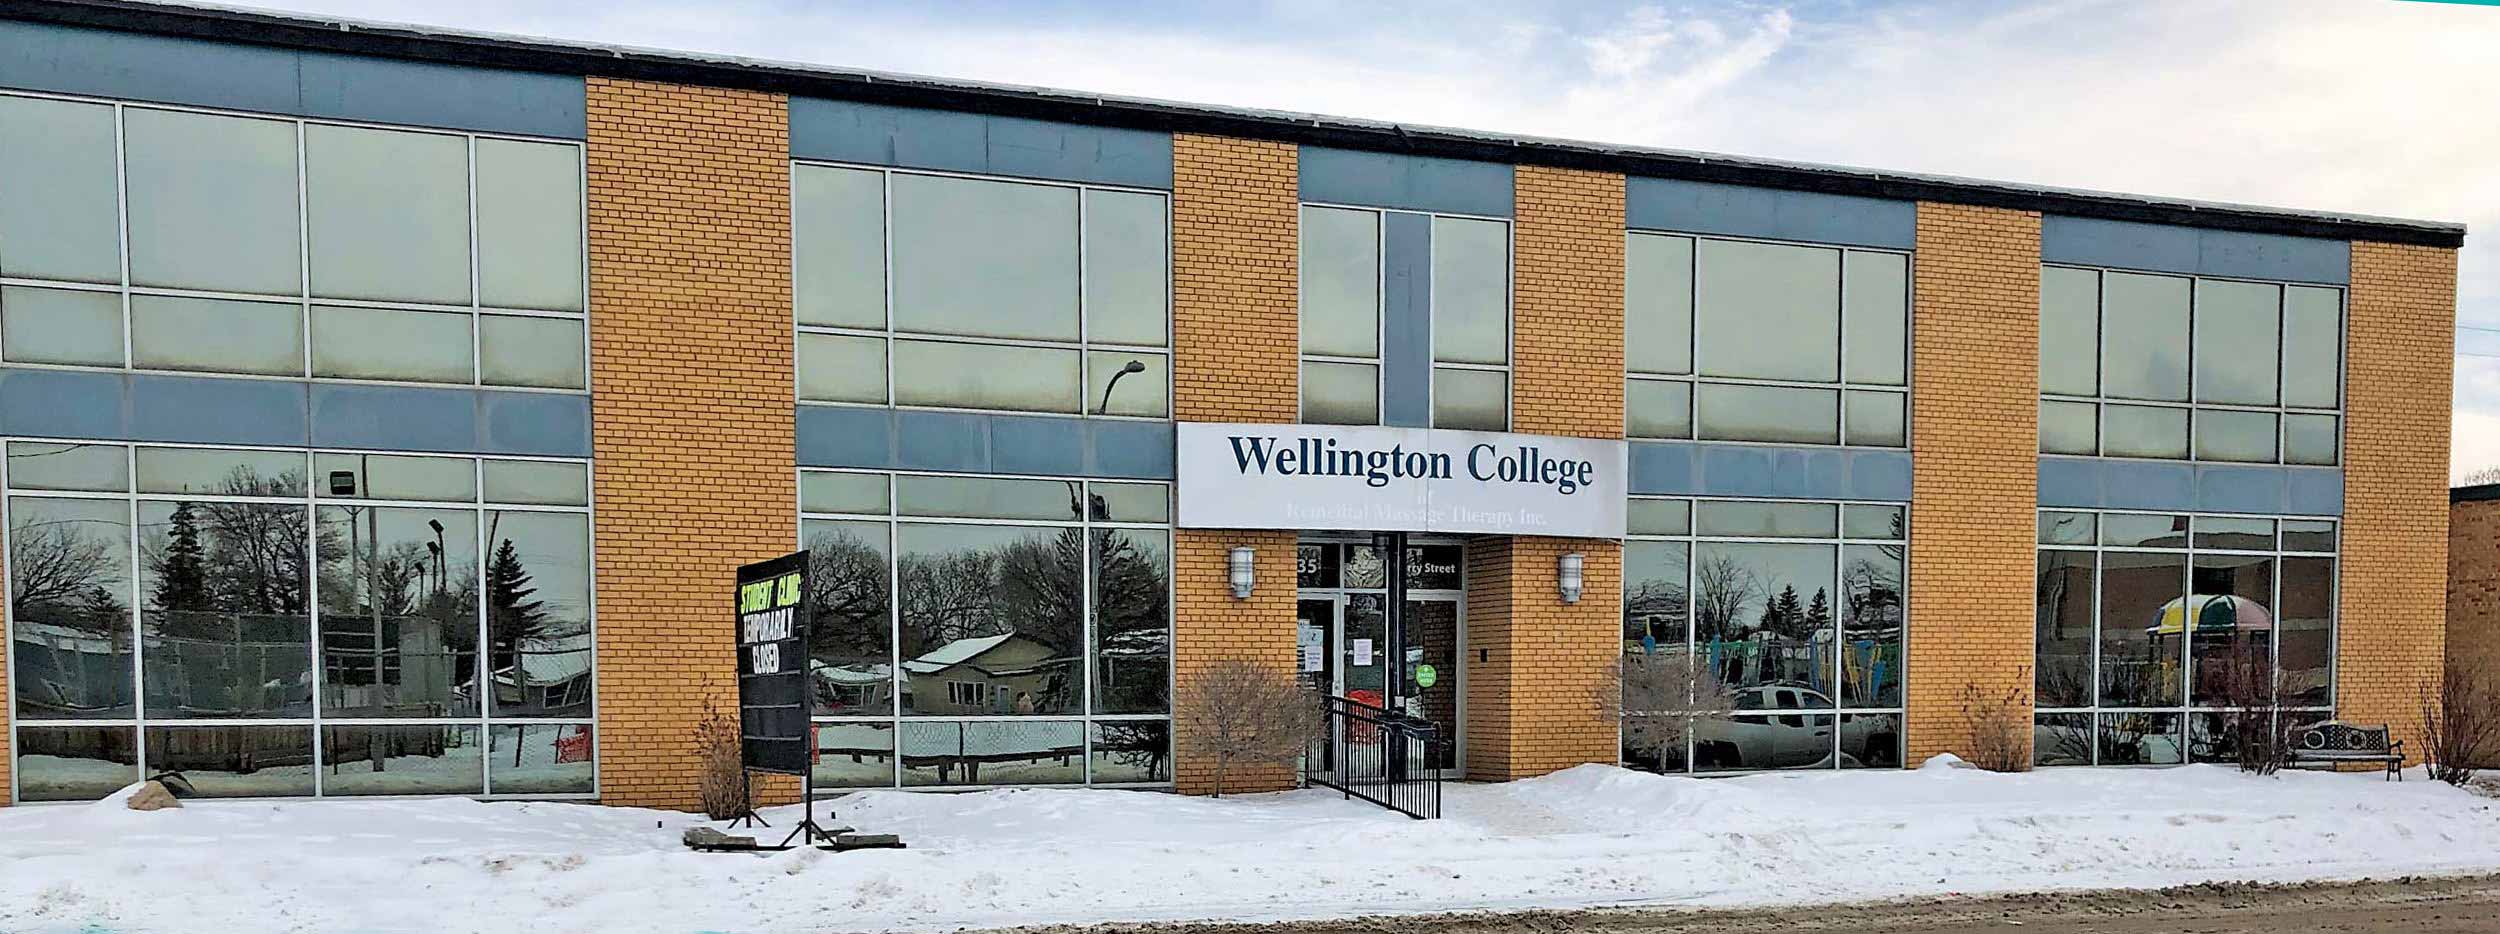 The Canadian College of Osteopathy School of Winnipeg